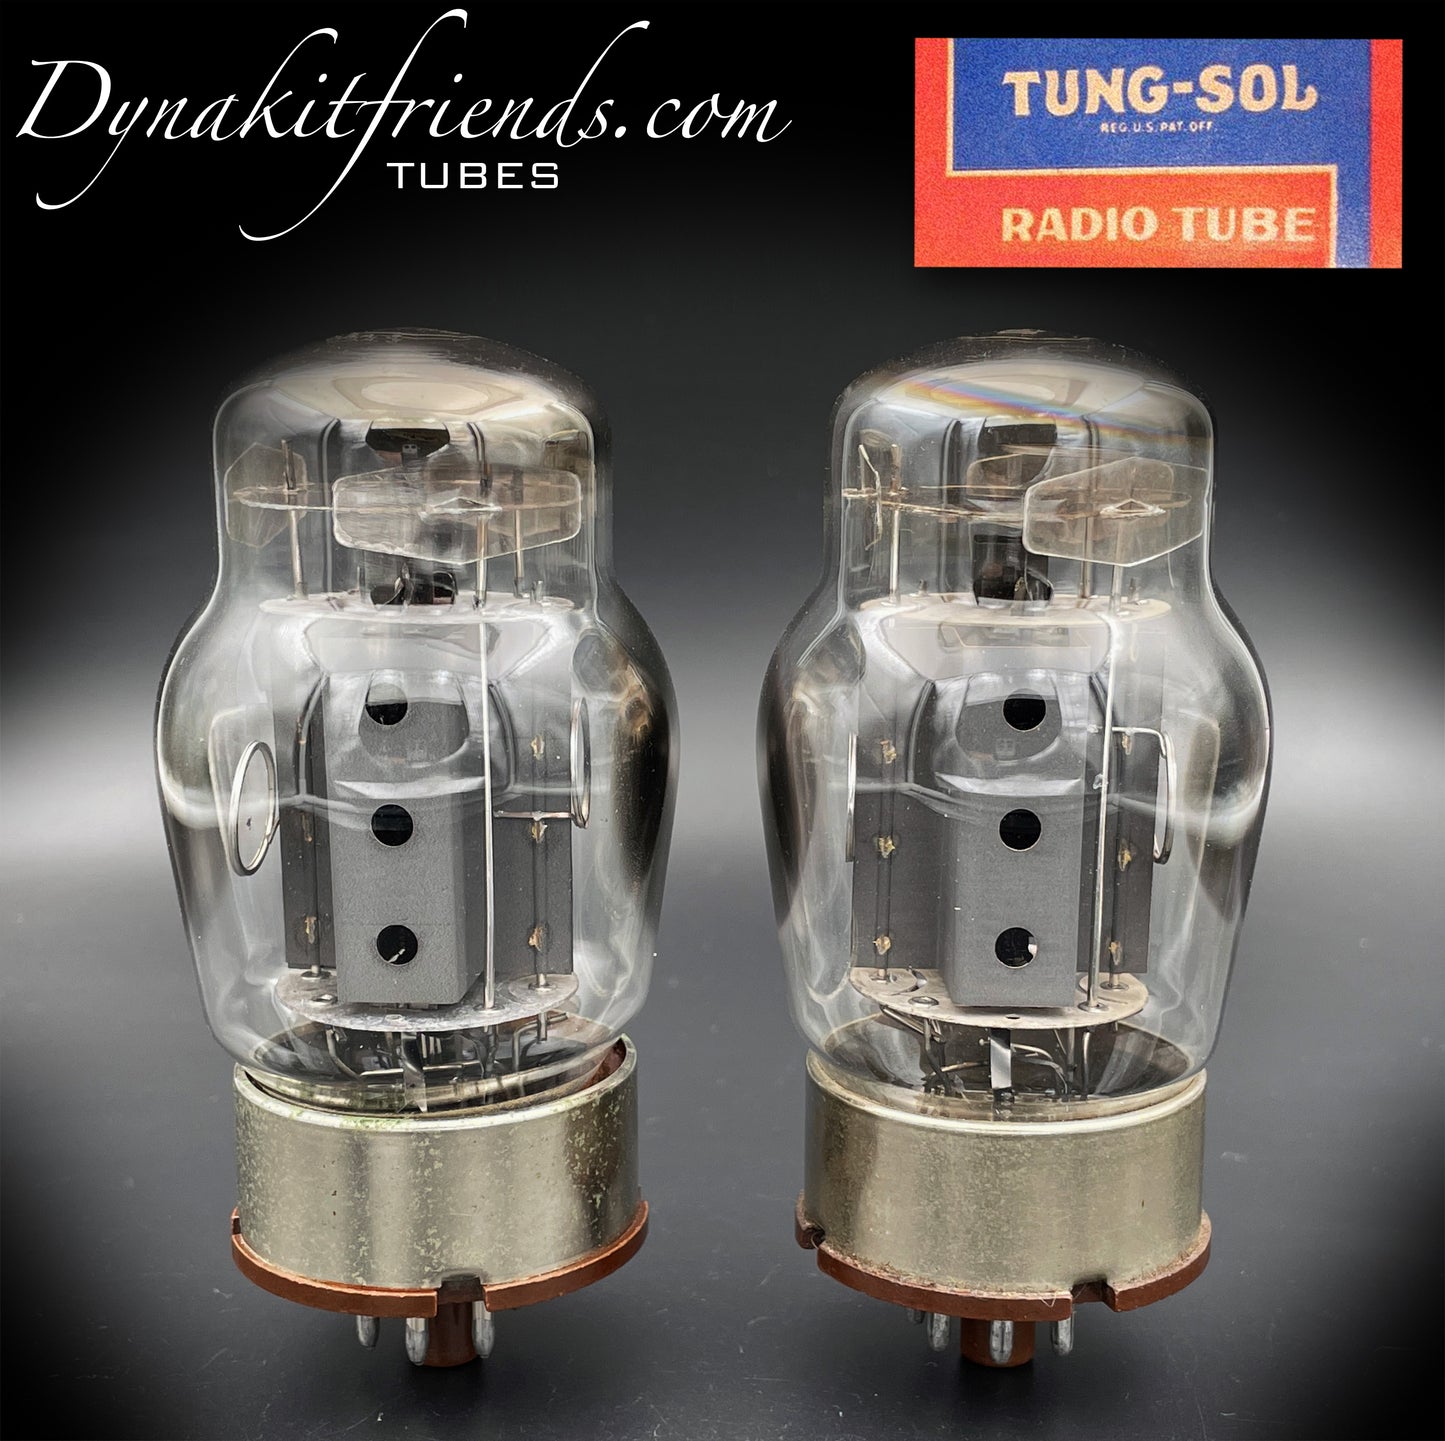 6550 TUNG-SOL NOS Type 2 - 4th Generation Gray Plates Triple Halo Getter Three Holes Matched Tubes Made in USA